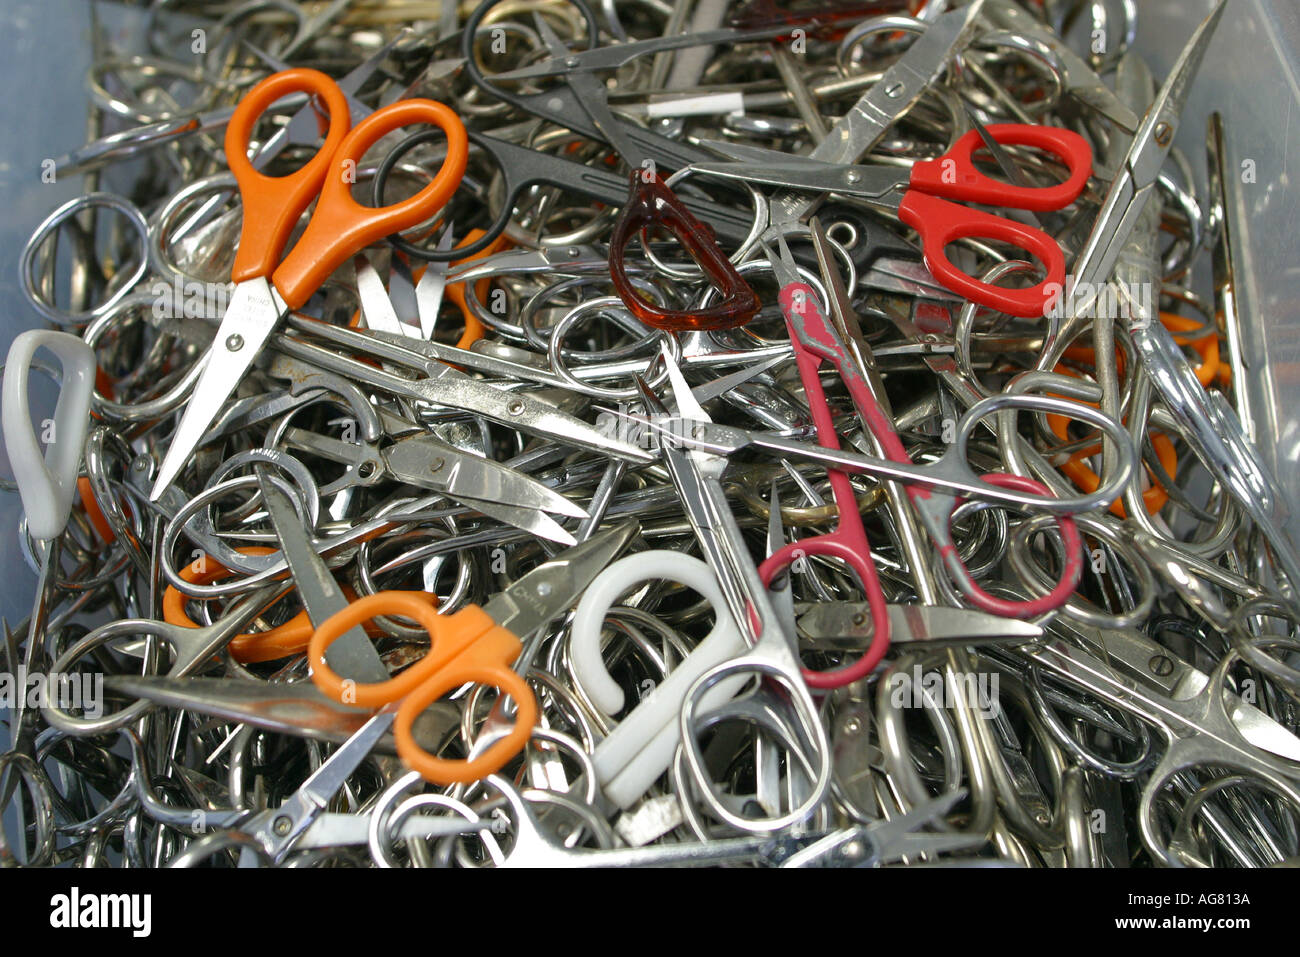 Confiscated items from the airline airport security that were not allowed on the plane including scissors Stock Photo